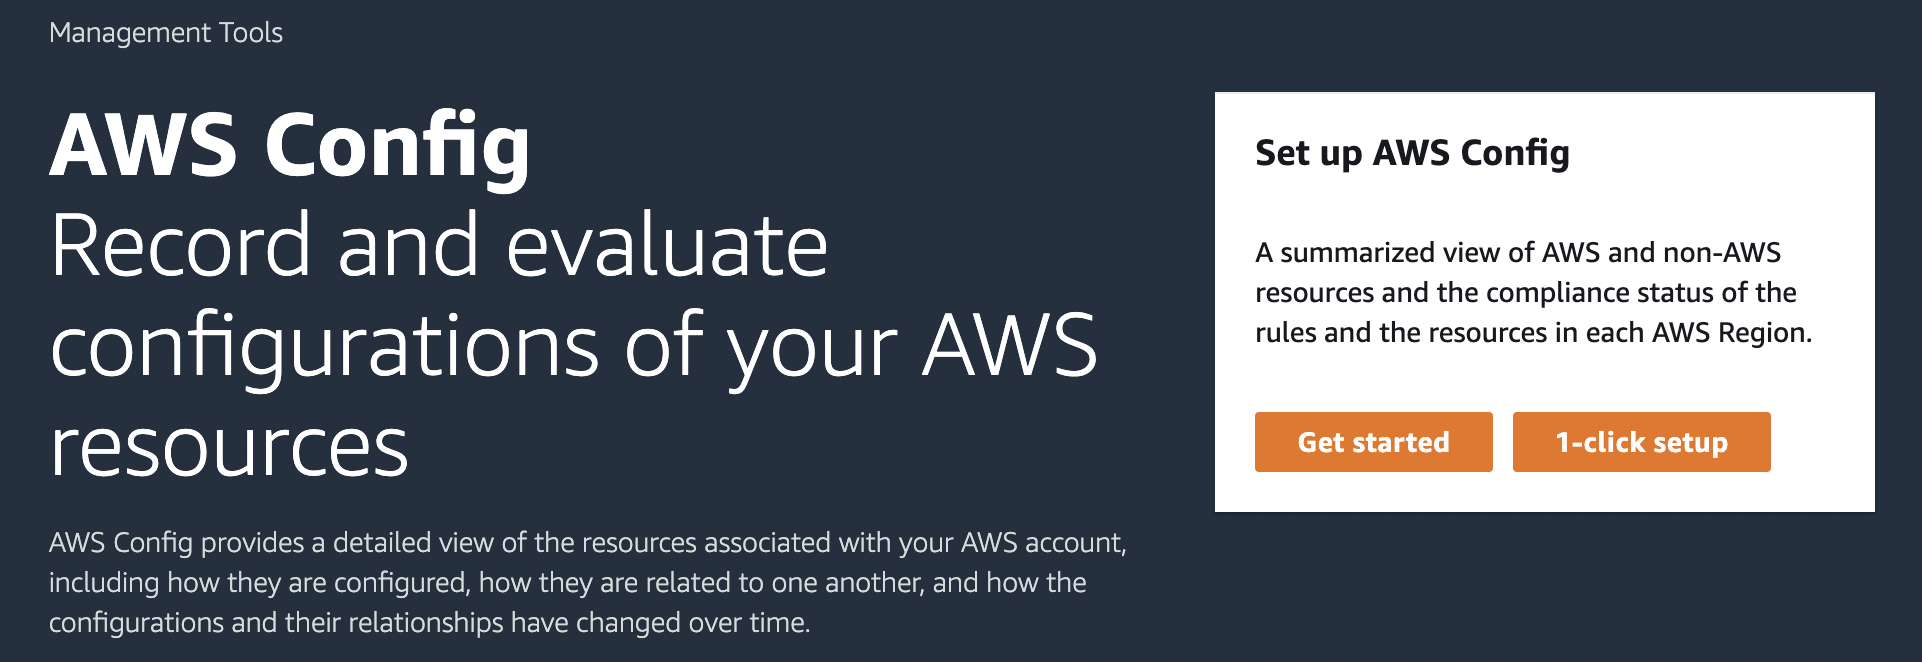 
                    The image on the AWS Config Console page provides an overview of the AWS Config service,
                        emphasizing its role in recording and evaluating the configuration chages of AWS resources.
                